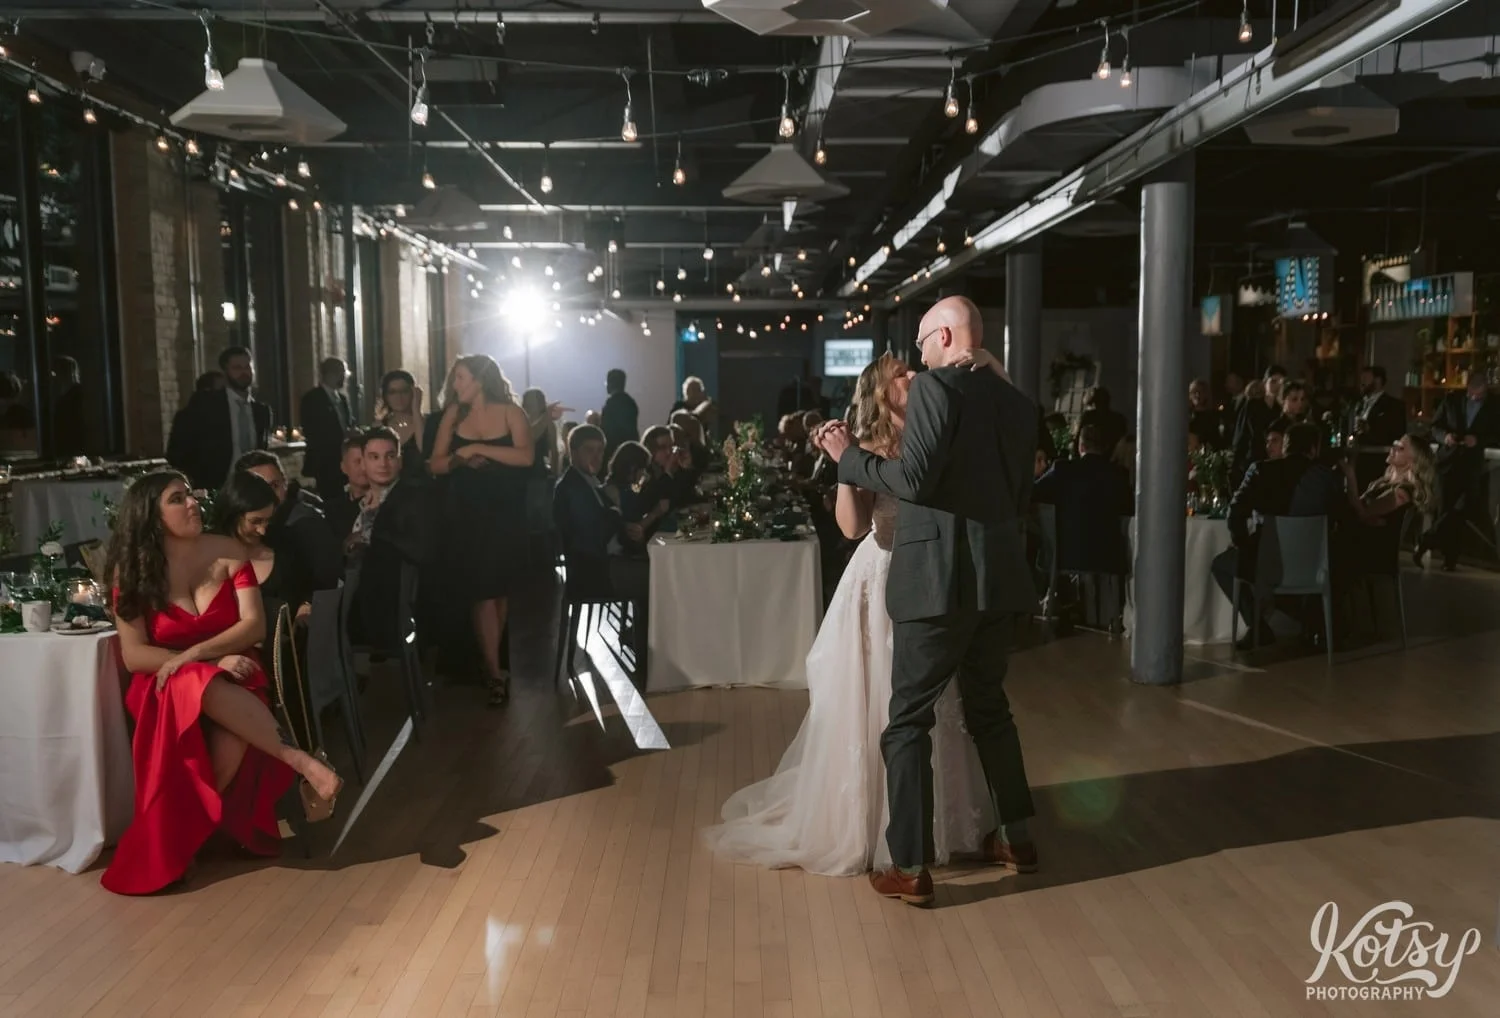 A bride in a white wedding gown and grooming gray suit enjoy a first dance in front of a large crowd of people sat at dinner tables during their Second Floor Events wedding reception in Toronto, Canada.